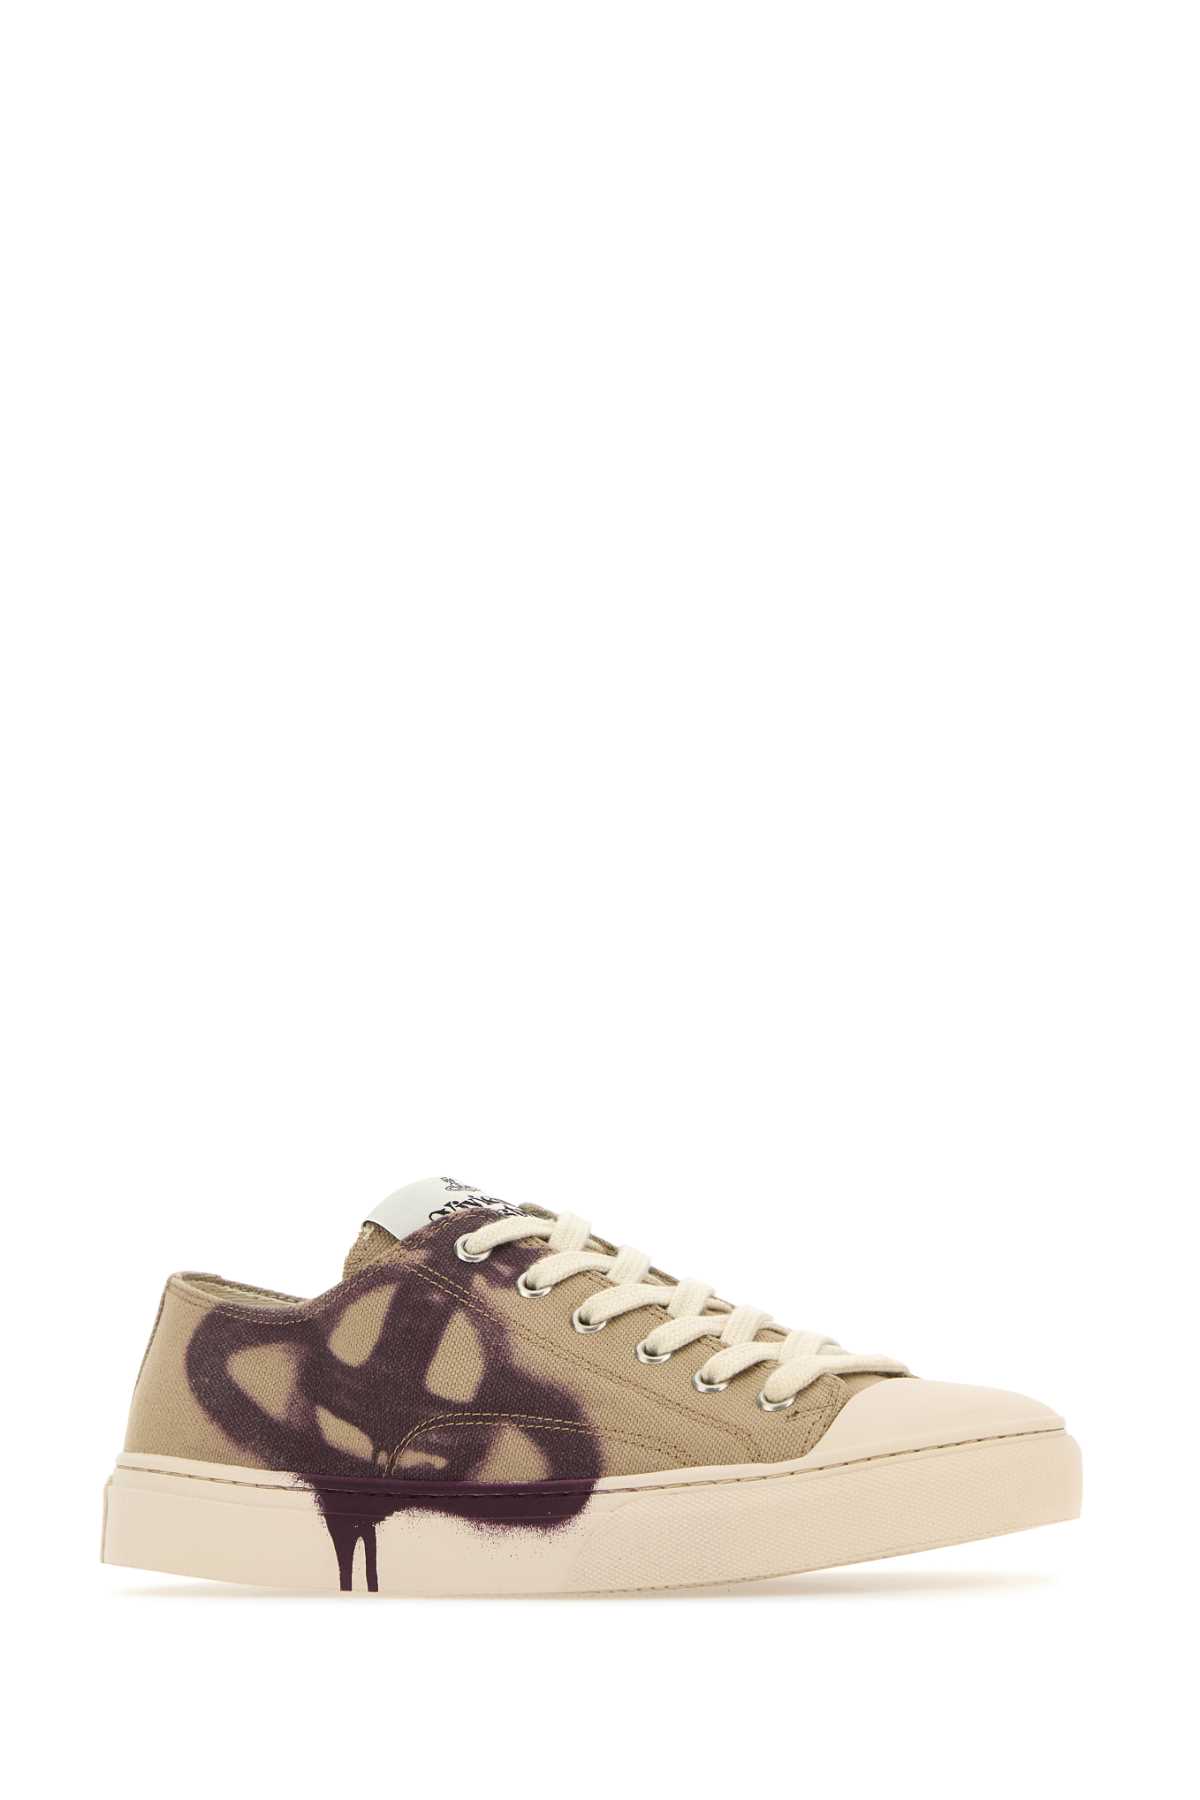 VIVIENNE WESTWOOD CAPPUCCINO CANVAS PLIMSOLL LOW TOP 2.0 SNEAKERS